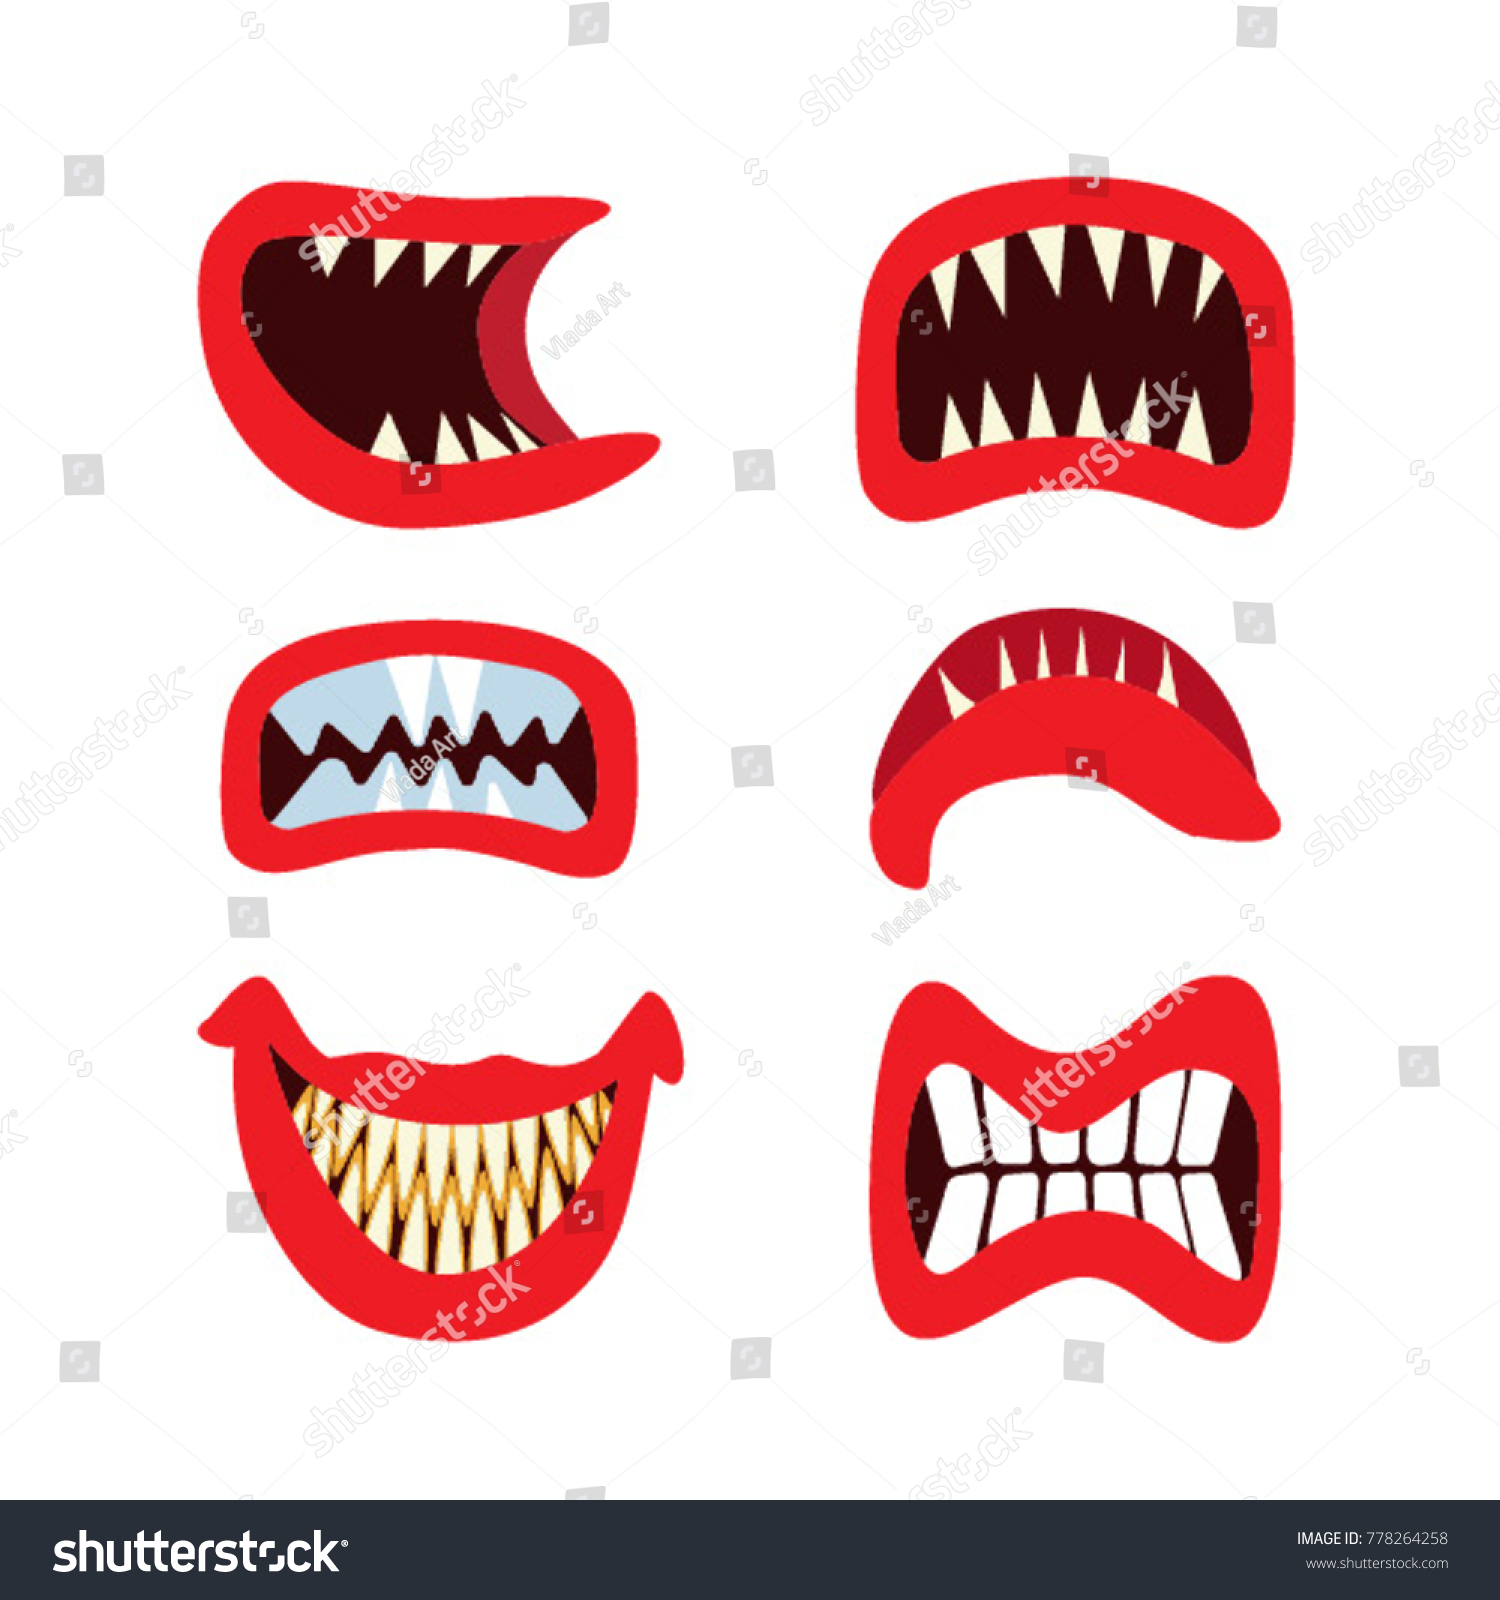 Set Cartoon Smiles Monster Red Lips Stock Vector (Royalty Free ...